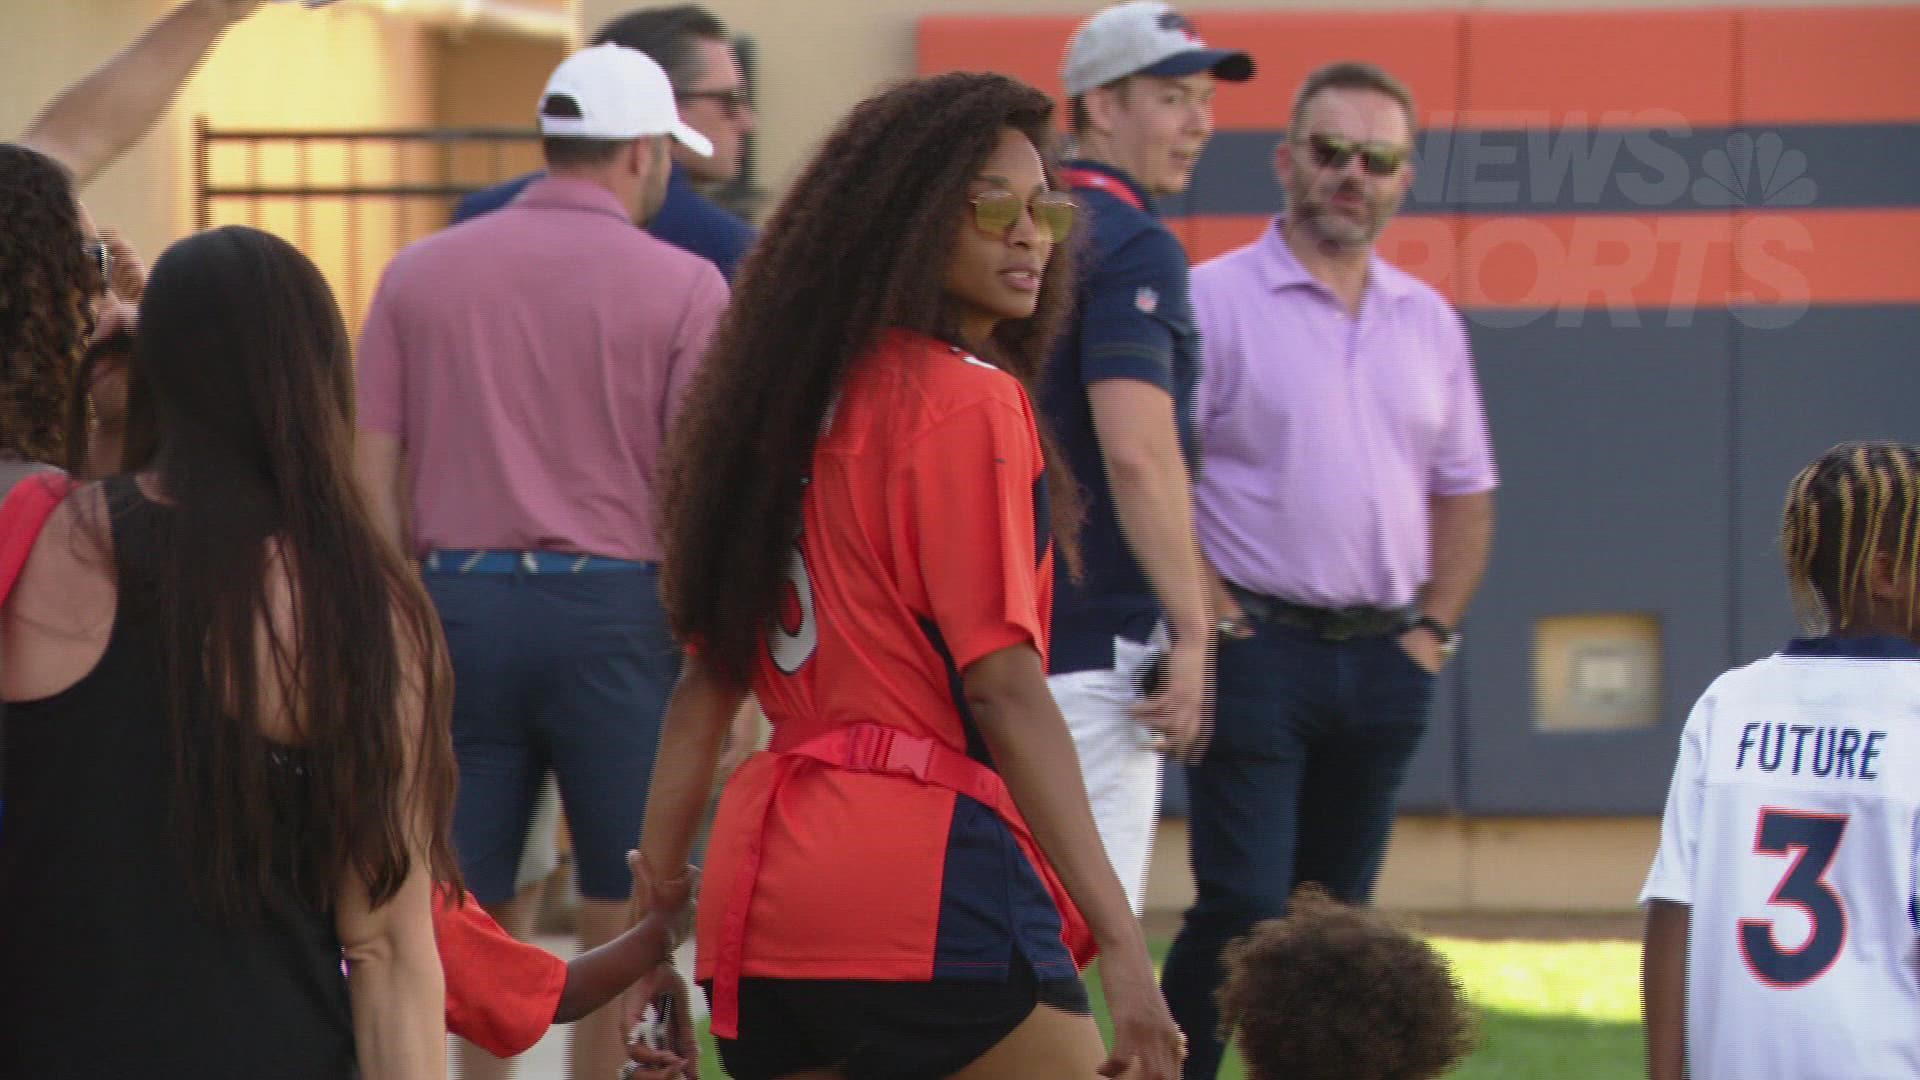 Ciara and Wilson family attend Broncos training camp